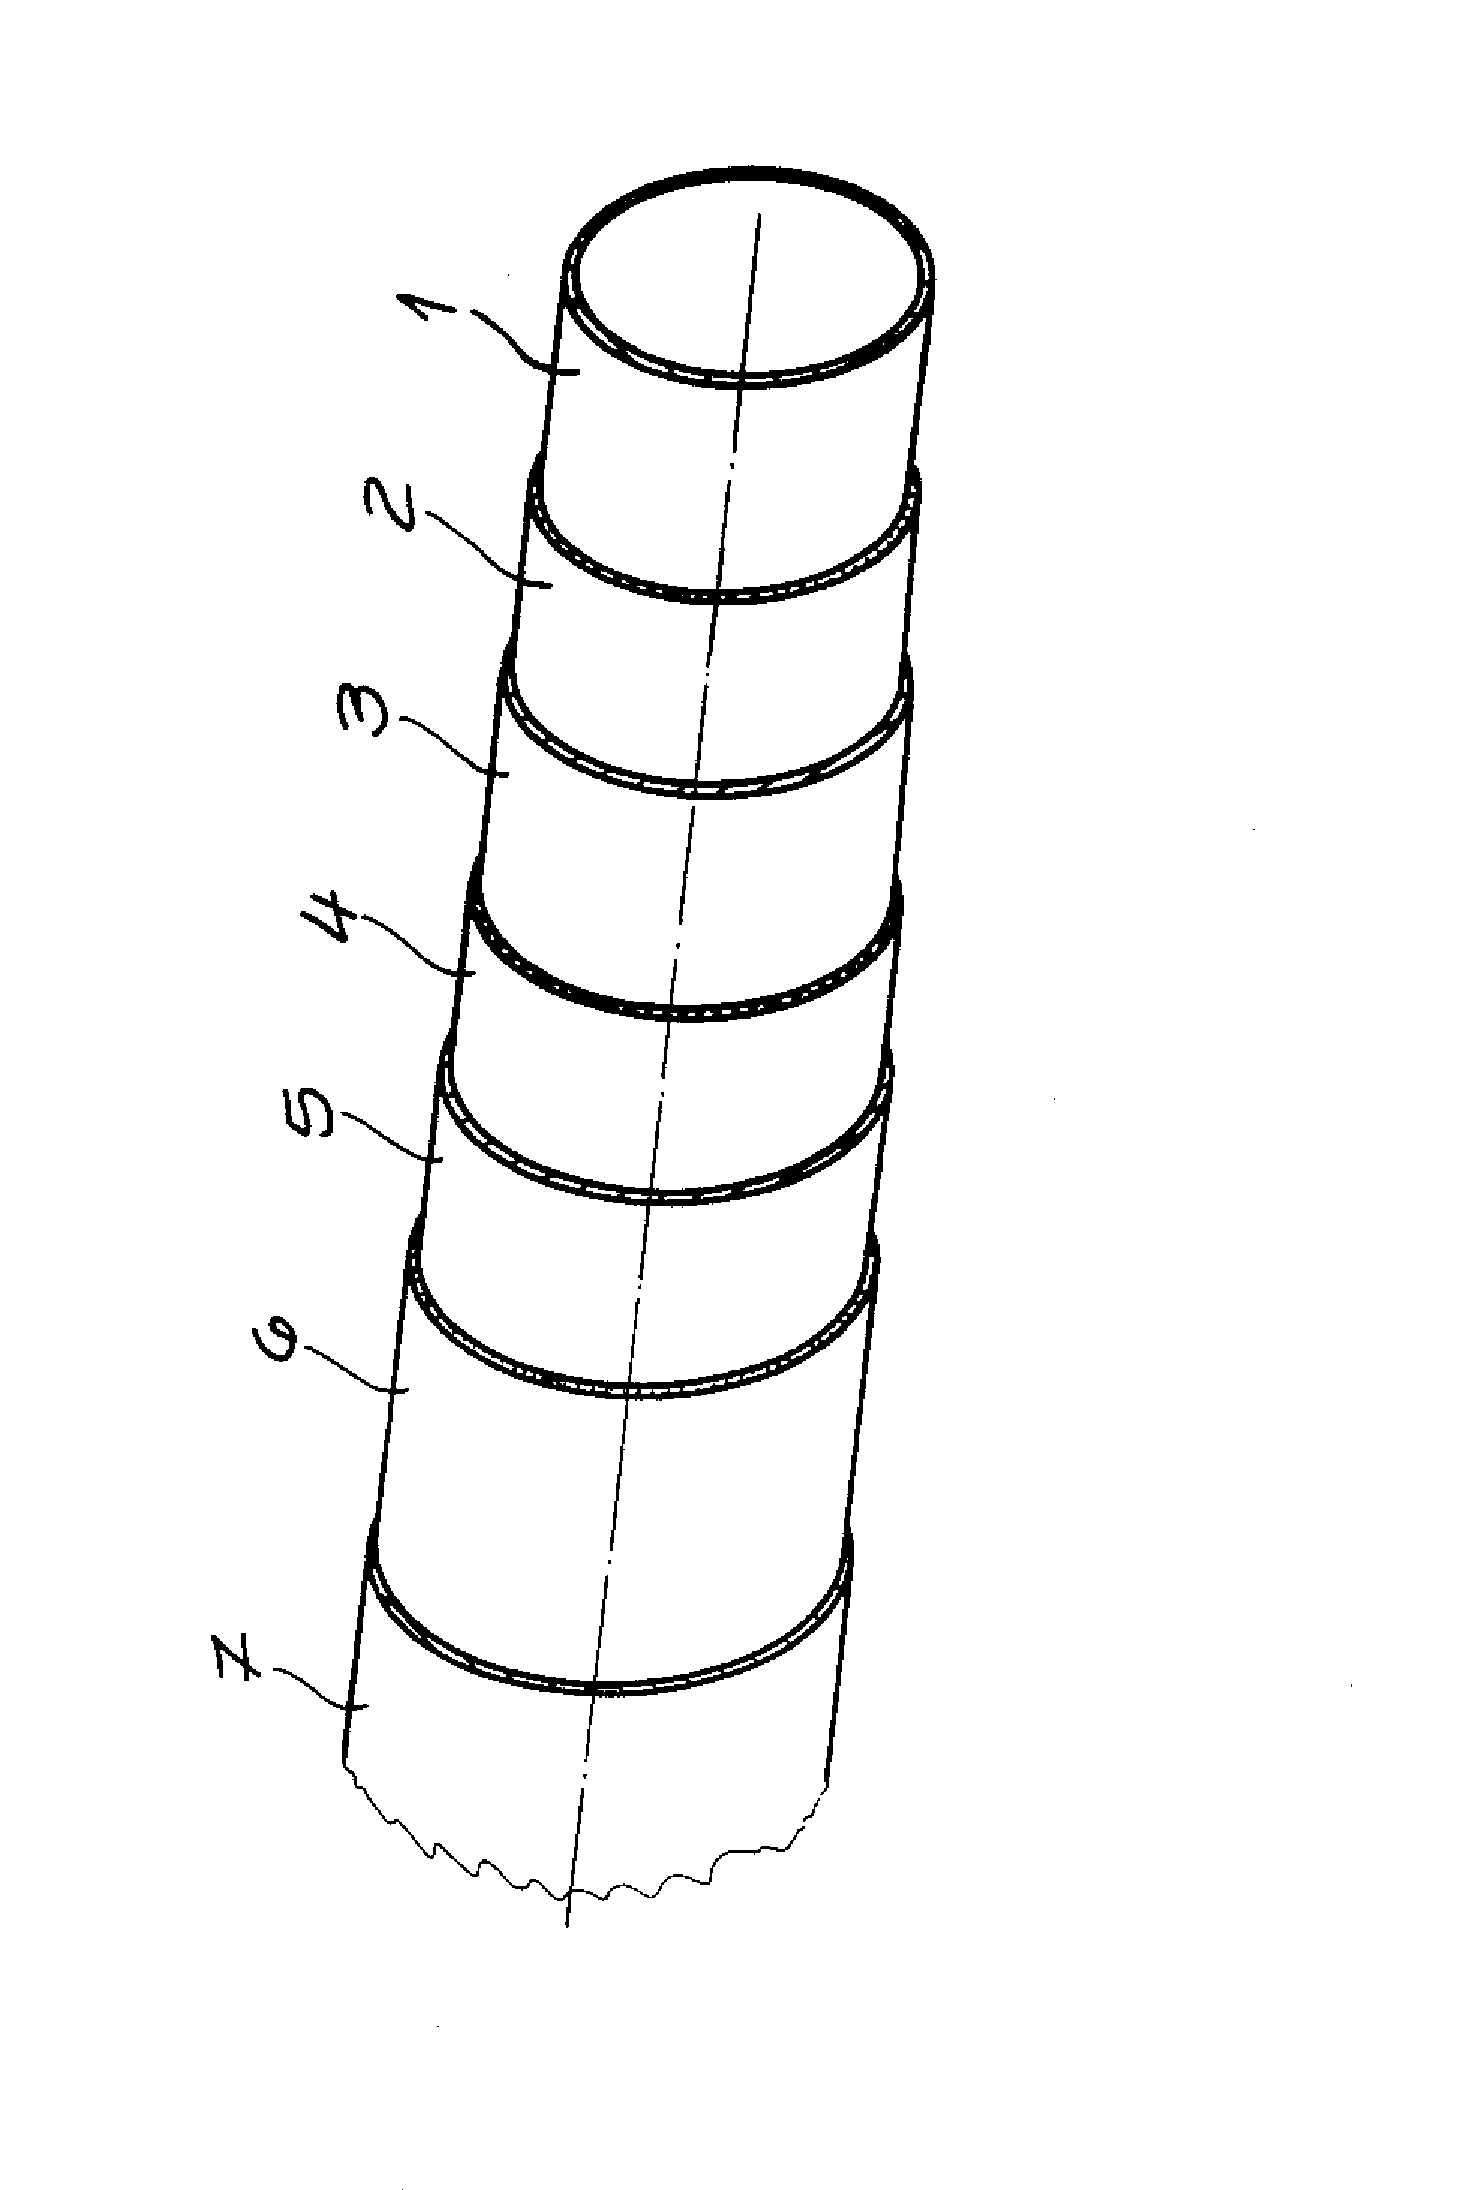 Multi-Layered Fuel Feed Pipe